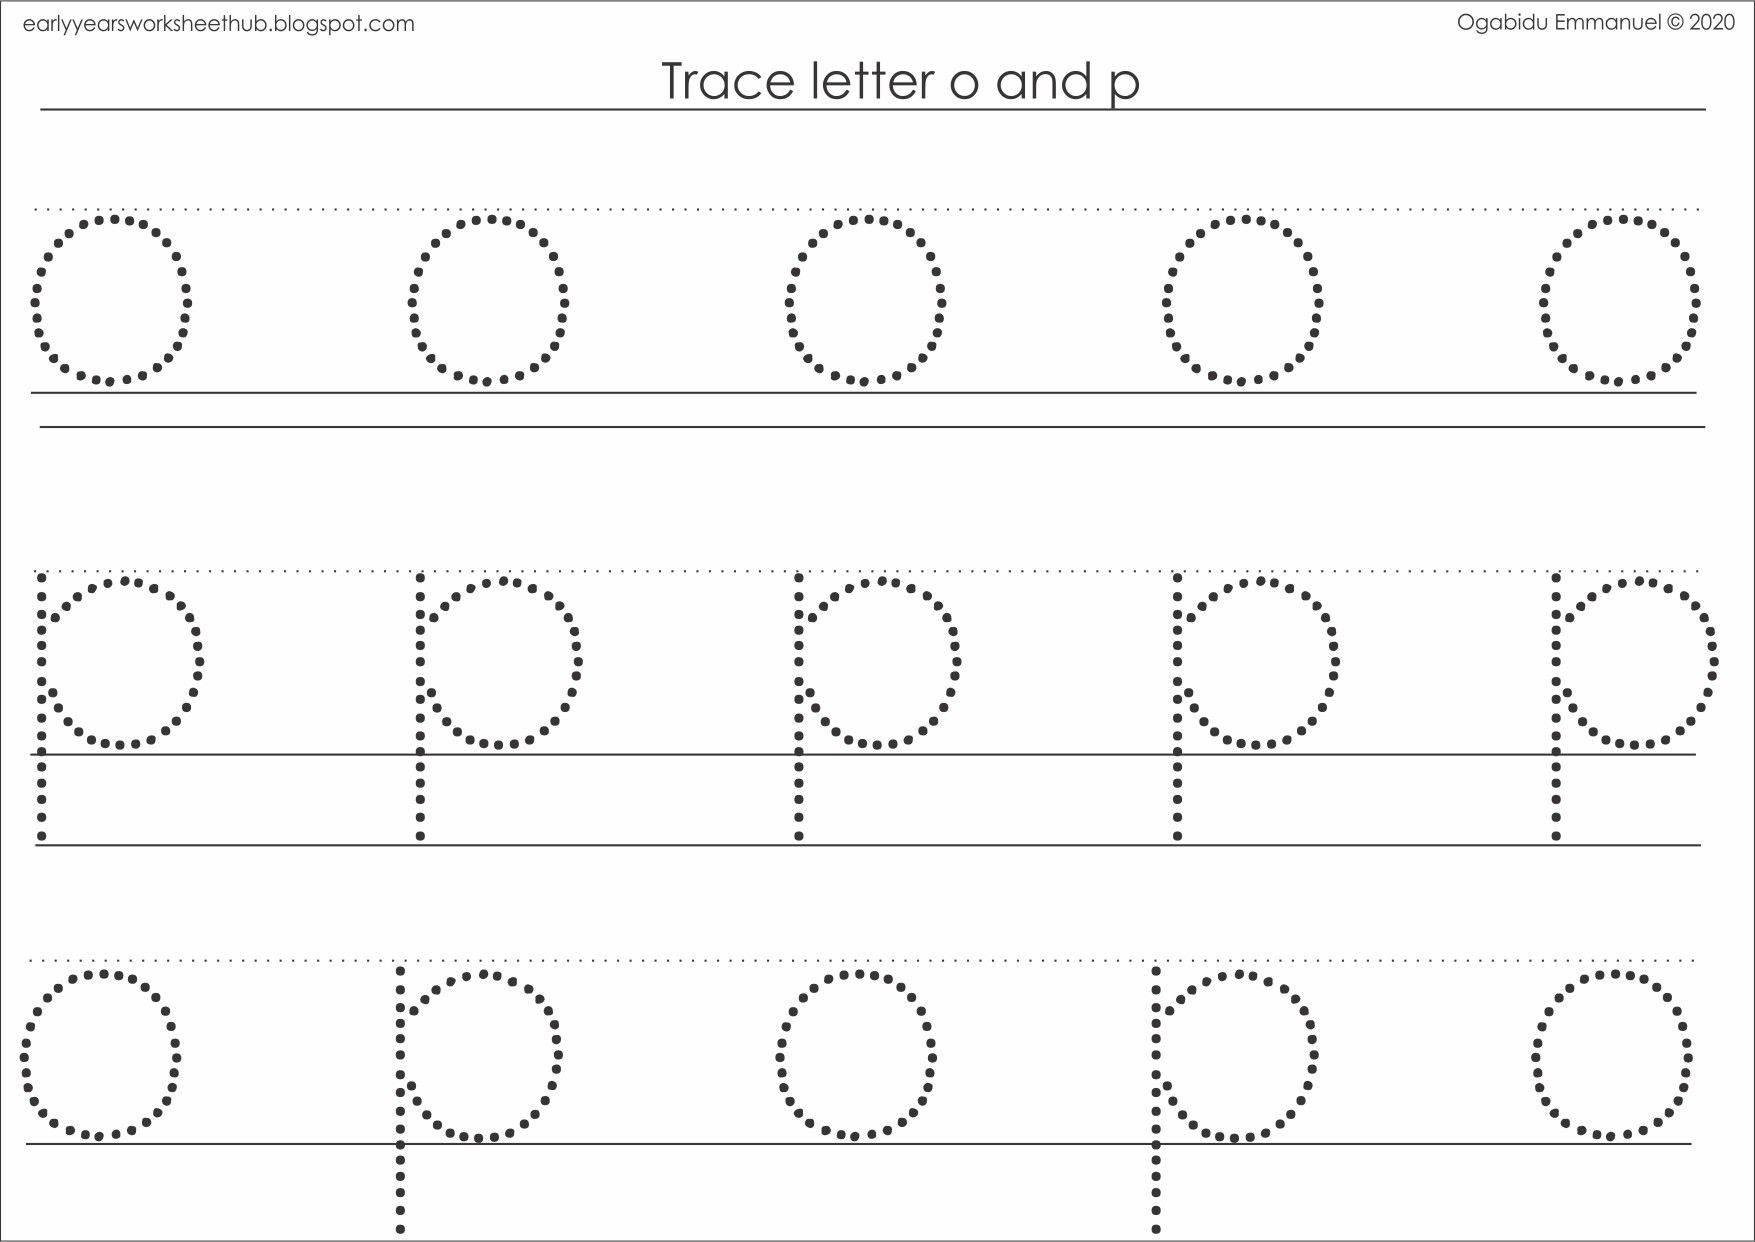 Tracing Letter O And P In 2020 | Kids Activity Books pertaining to Letter Tracing Interactive